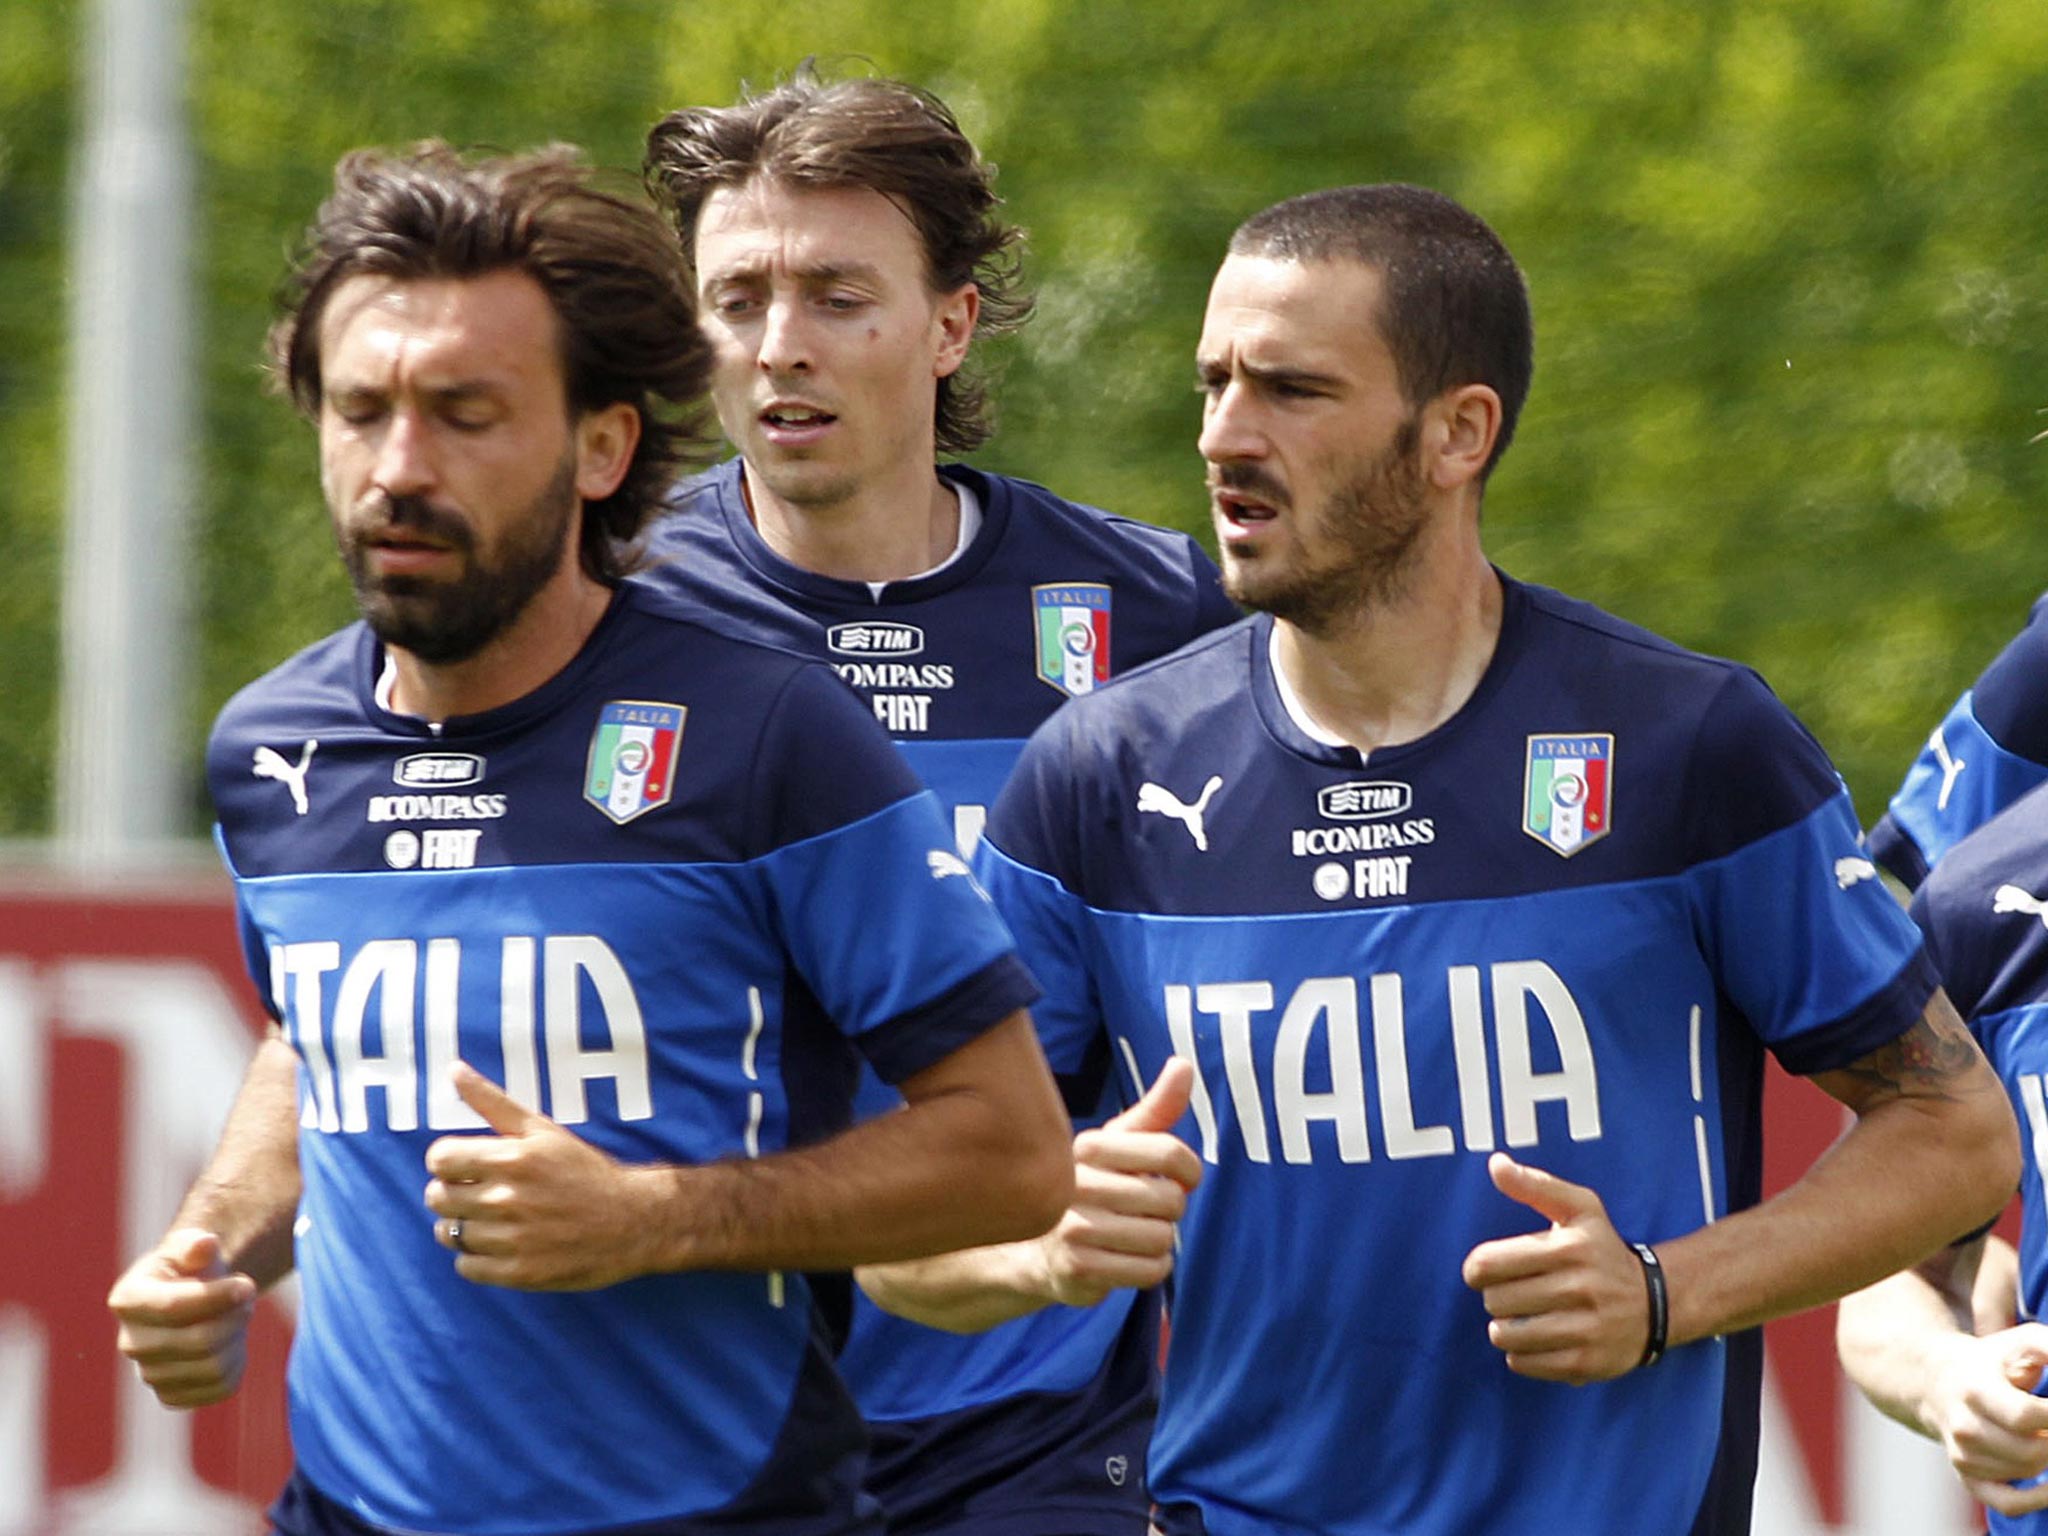 Andrea Pirlo, Riccardo Montolivo and Ciro Immobile in training with Italy before tonight’s friendly with Ireland at Craven Cottage